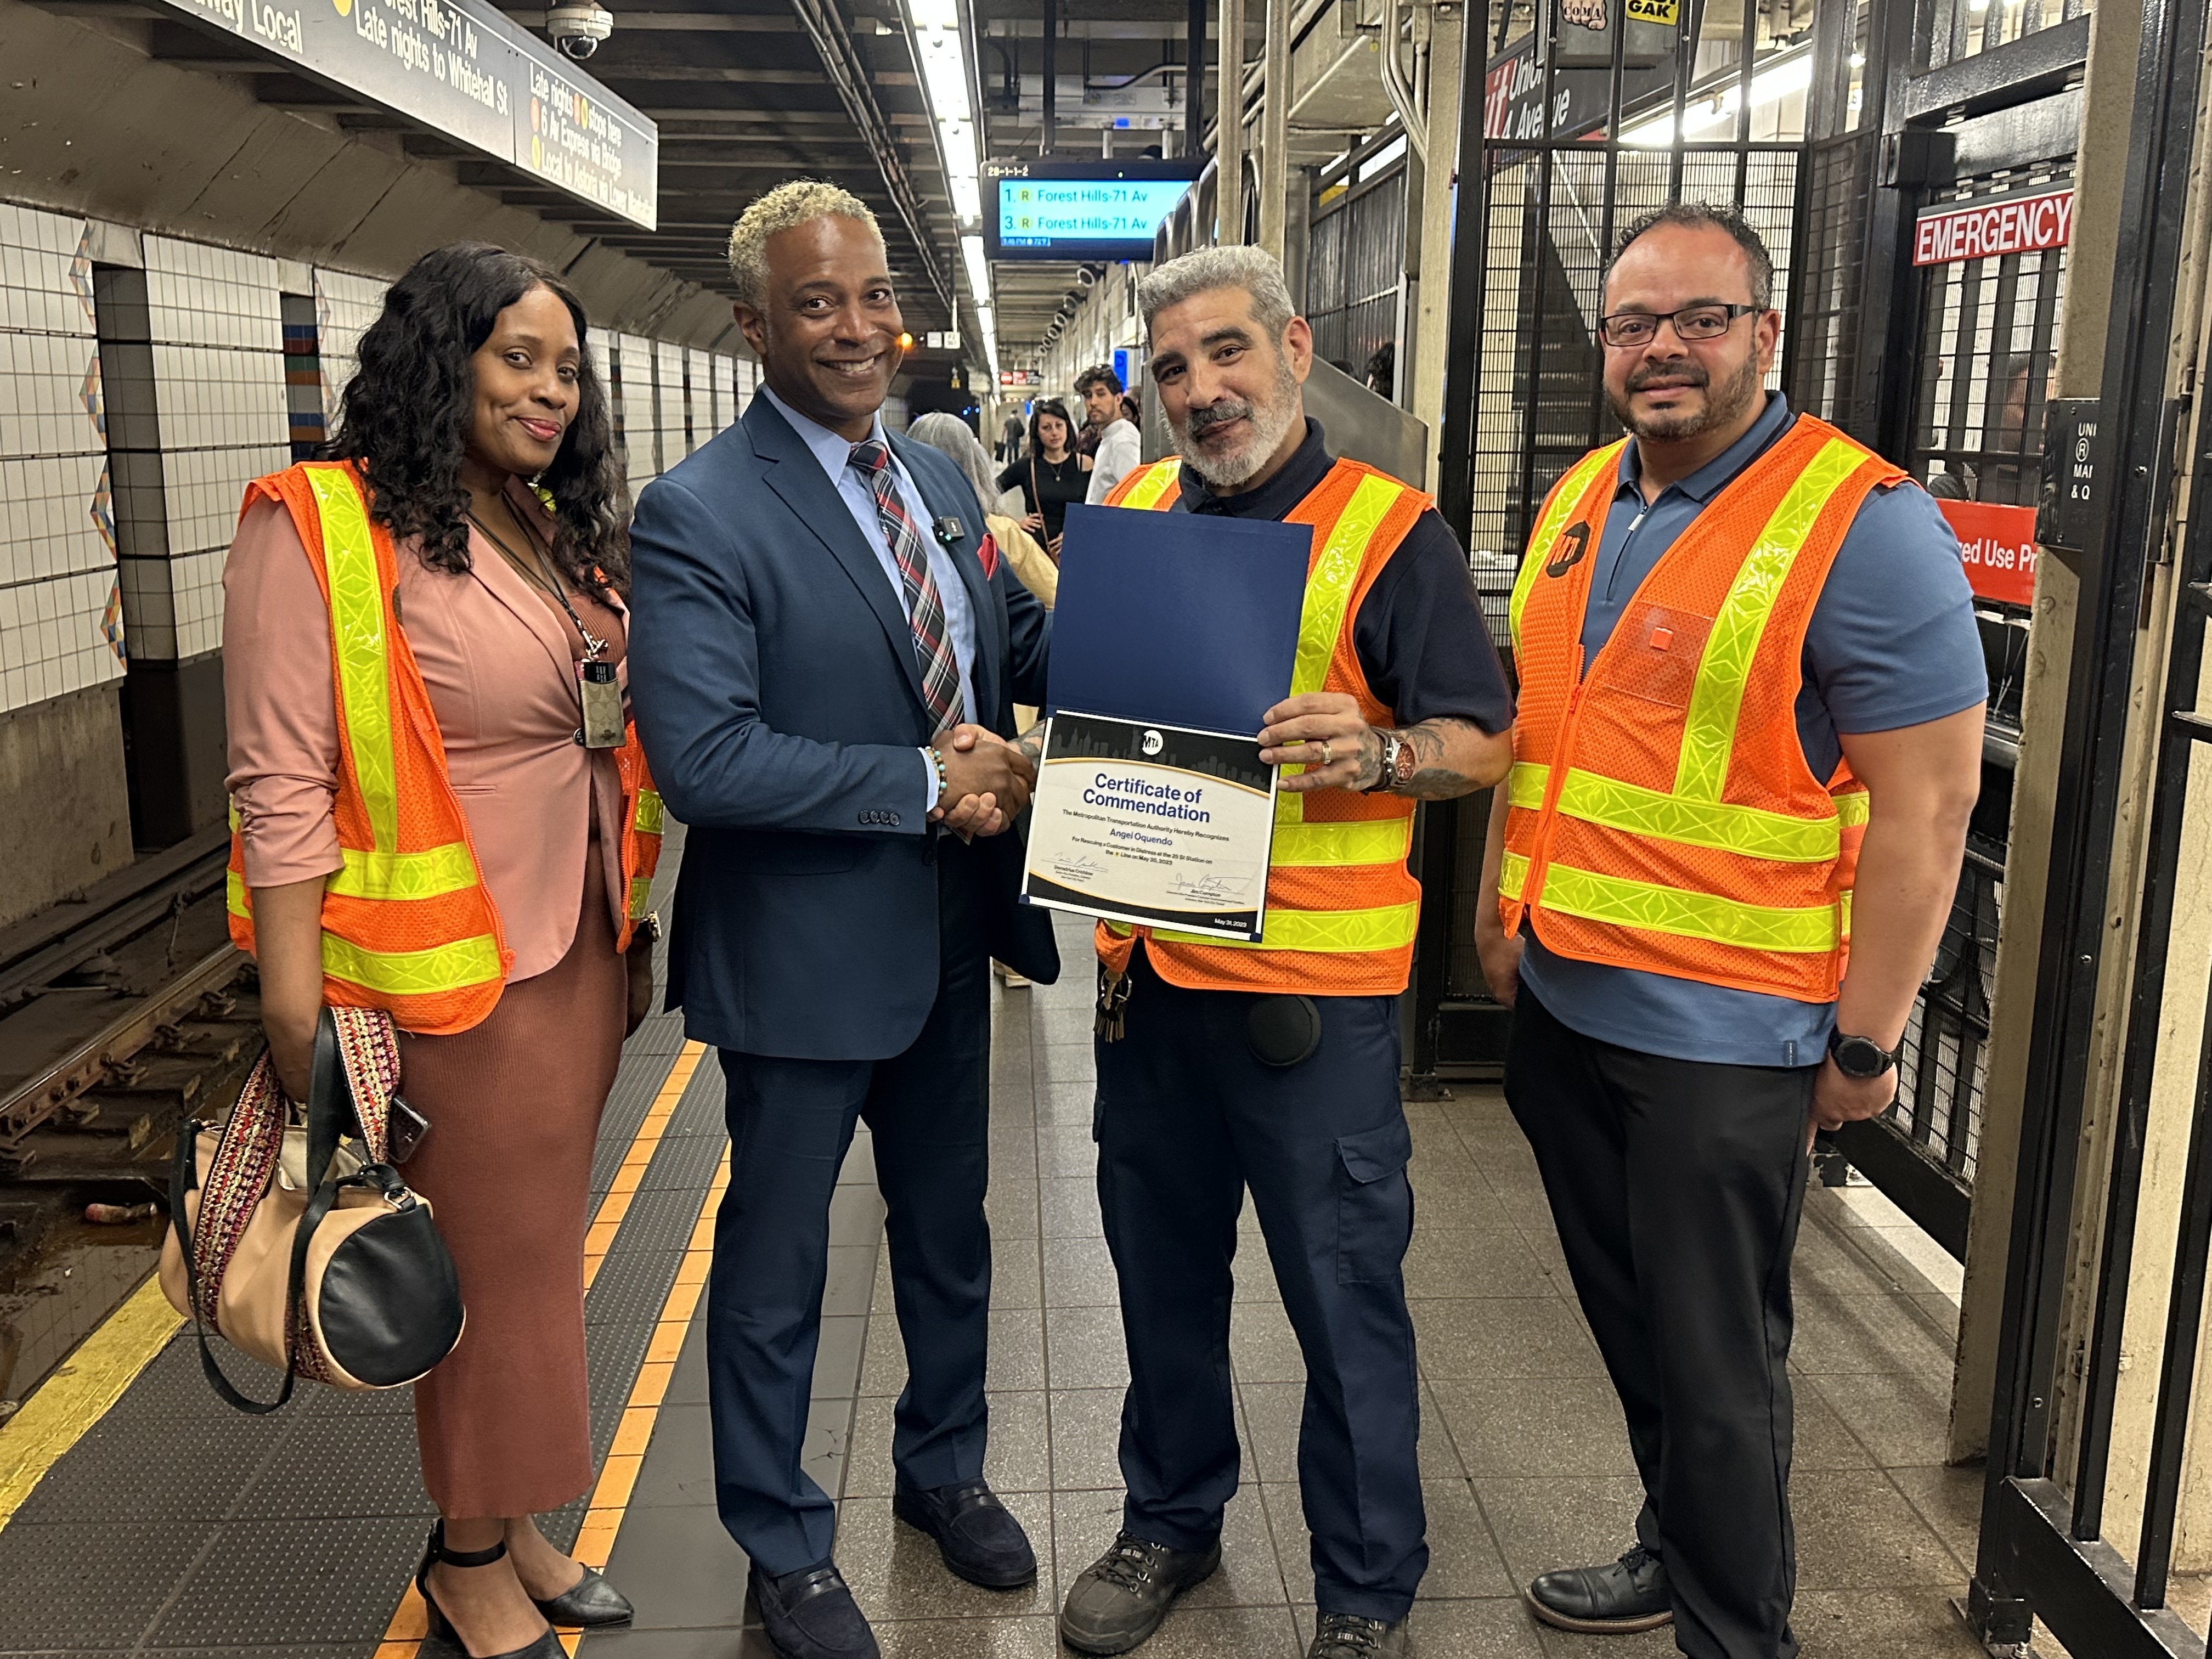 Metropolitan Transportation Authority (MTA) New York City Transit (NYCT) Senior Vice President of Subways Demetrius Crichlow presented NYCT Cleaner Angel Oquendo with a Certificate of Commendation for rescuing a customer in distress at the 25 St R station in Brooklyn on Tuesday, May 30. 